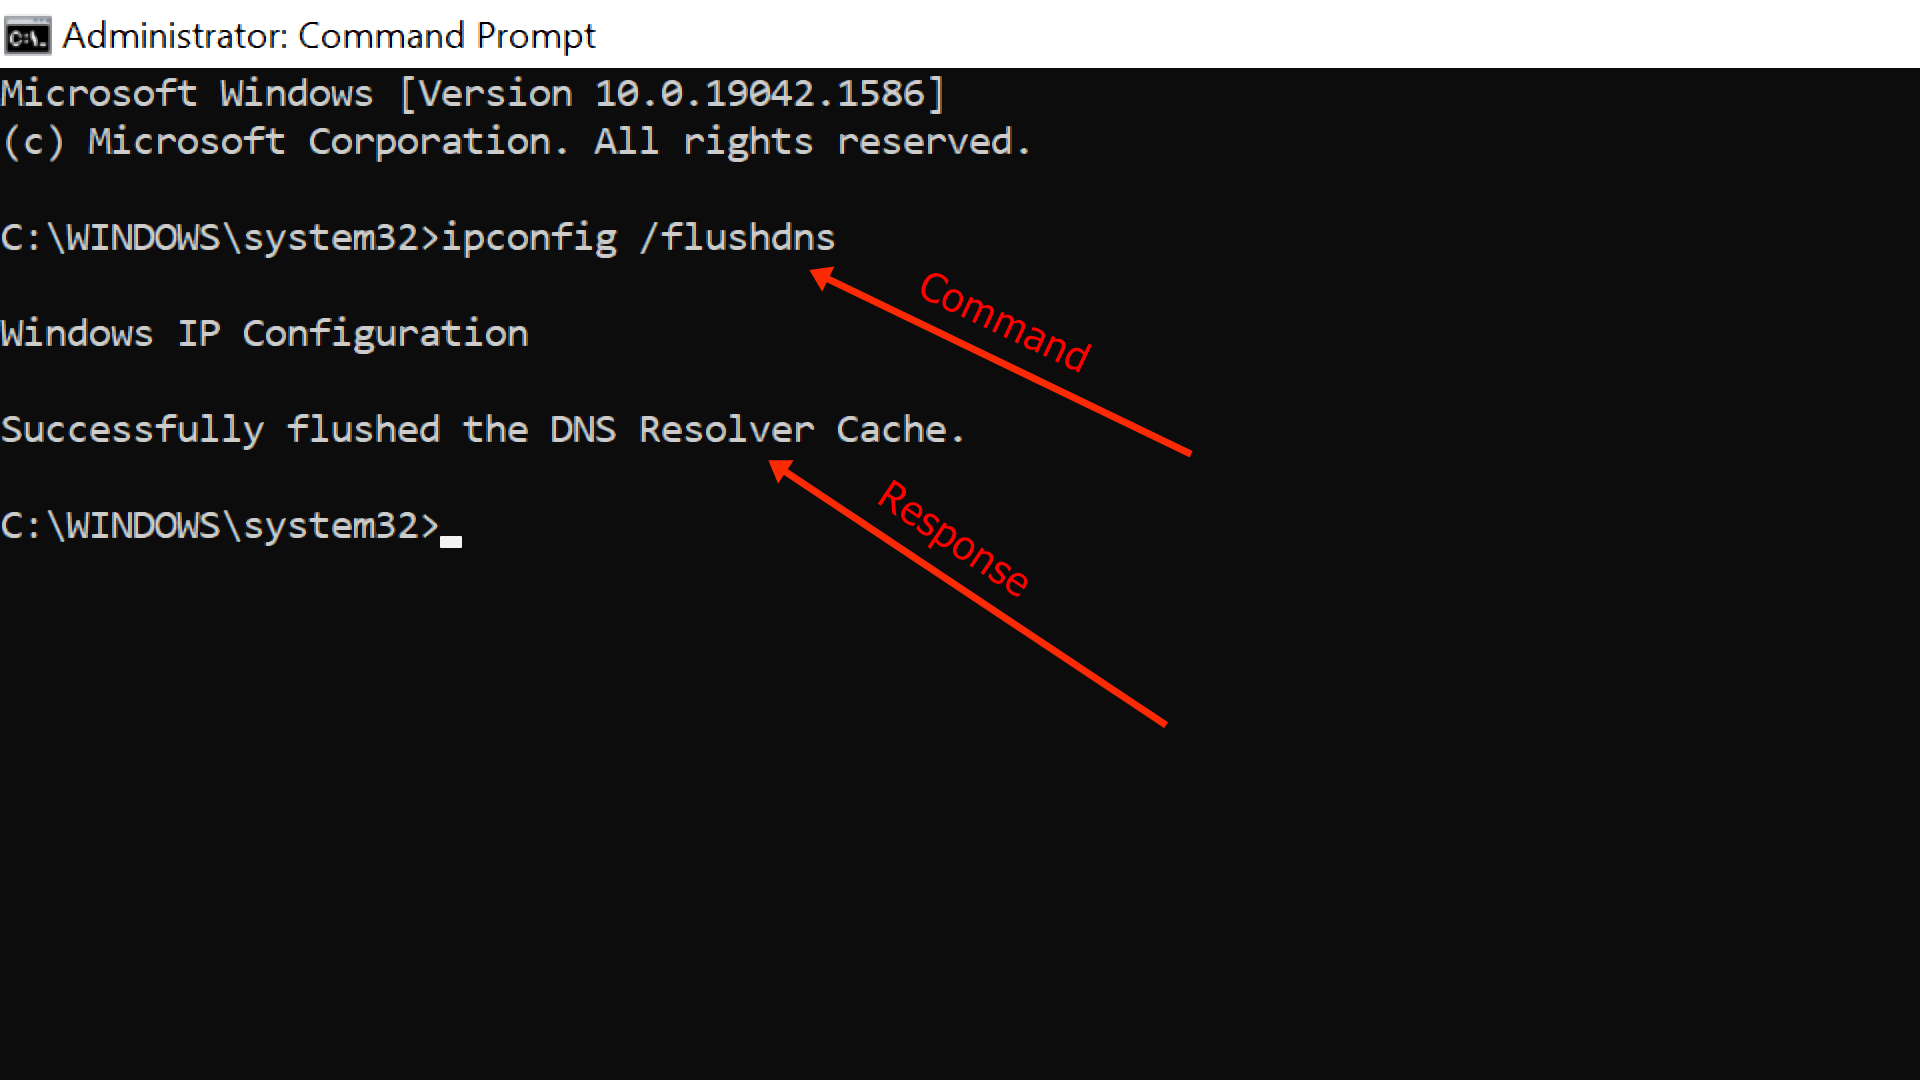 In the Command Prompt, type ipconfig /flushdns and press Enter.
Wait for the command to execute and clear the DNS cache.